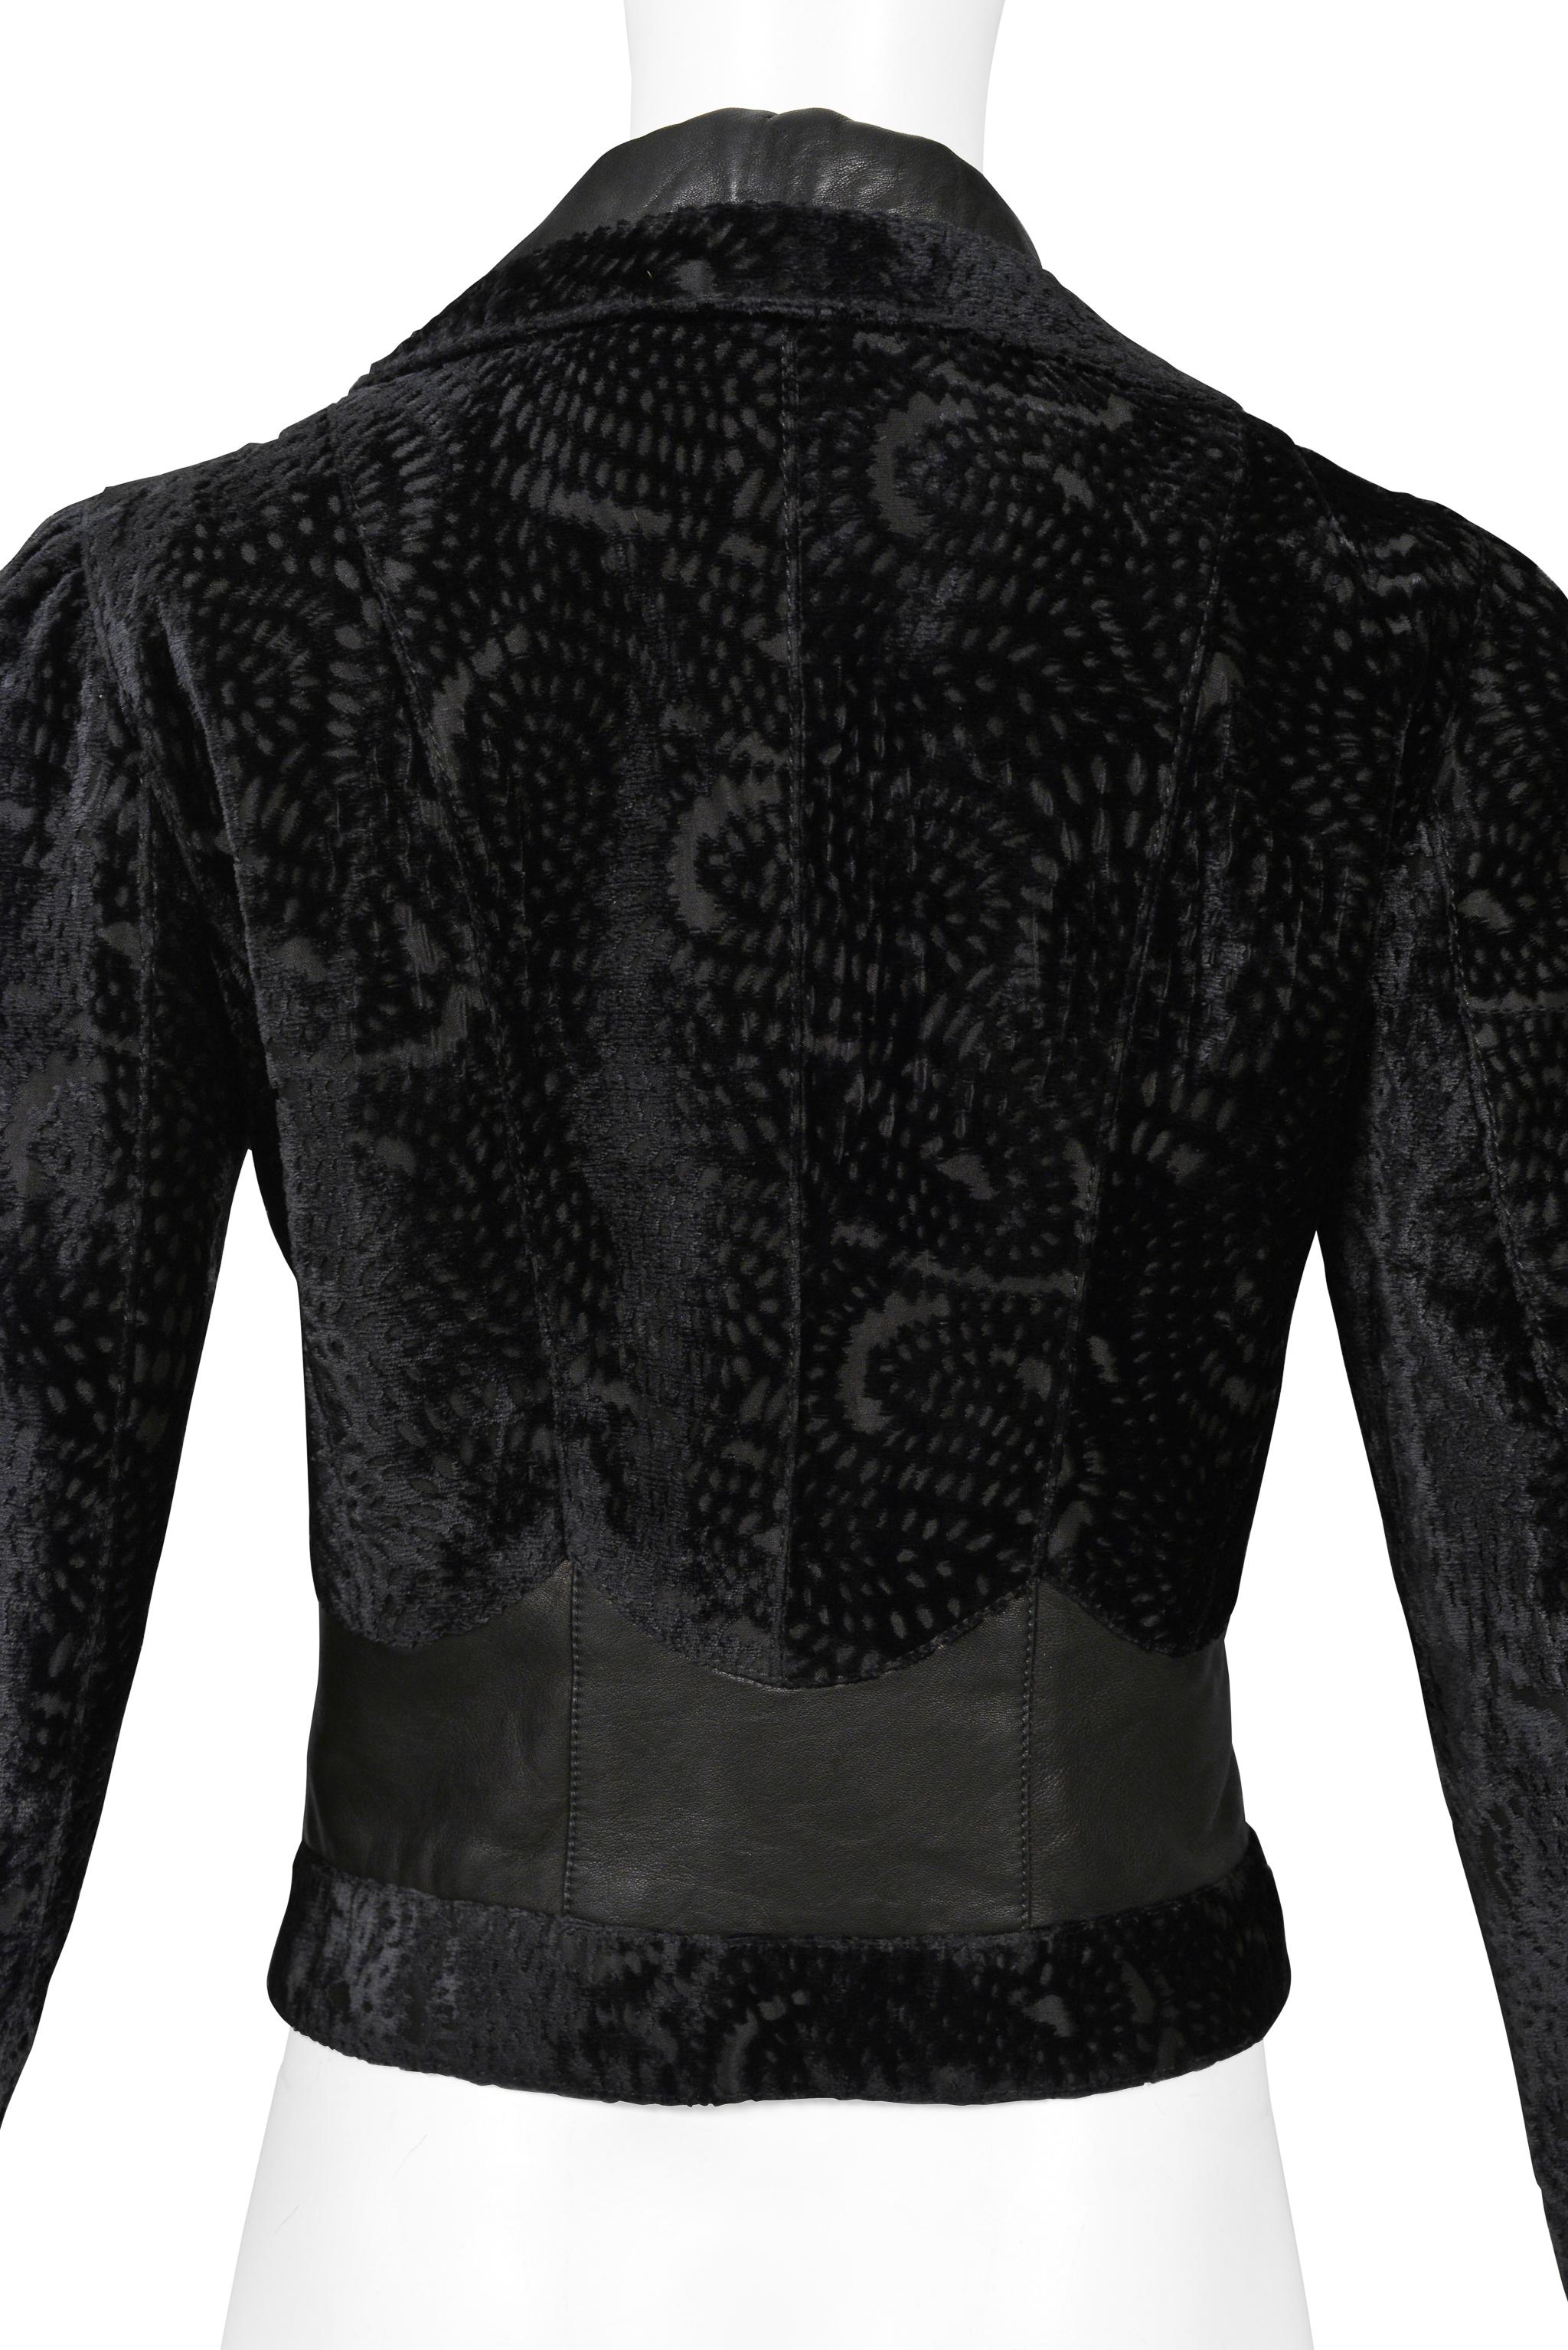 John Galliano Black Floral Silk Velvet Jacket With Leather Insets 2005 For Sale 3